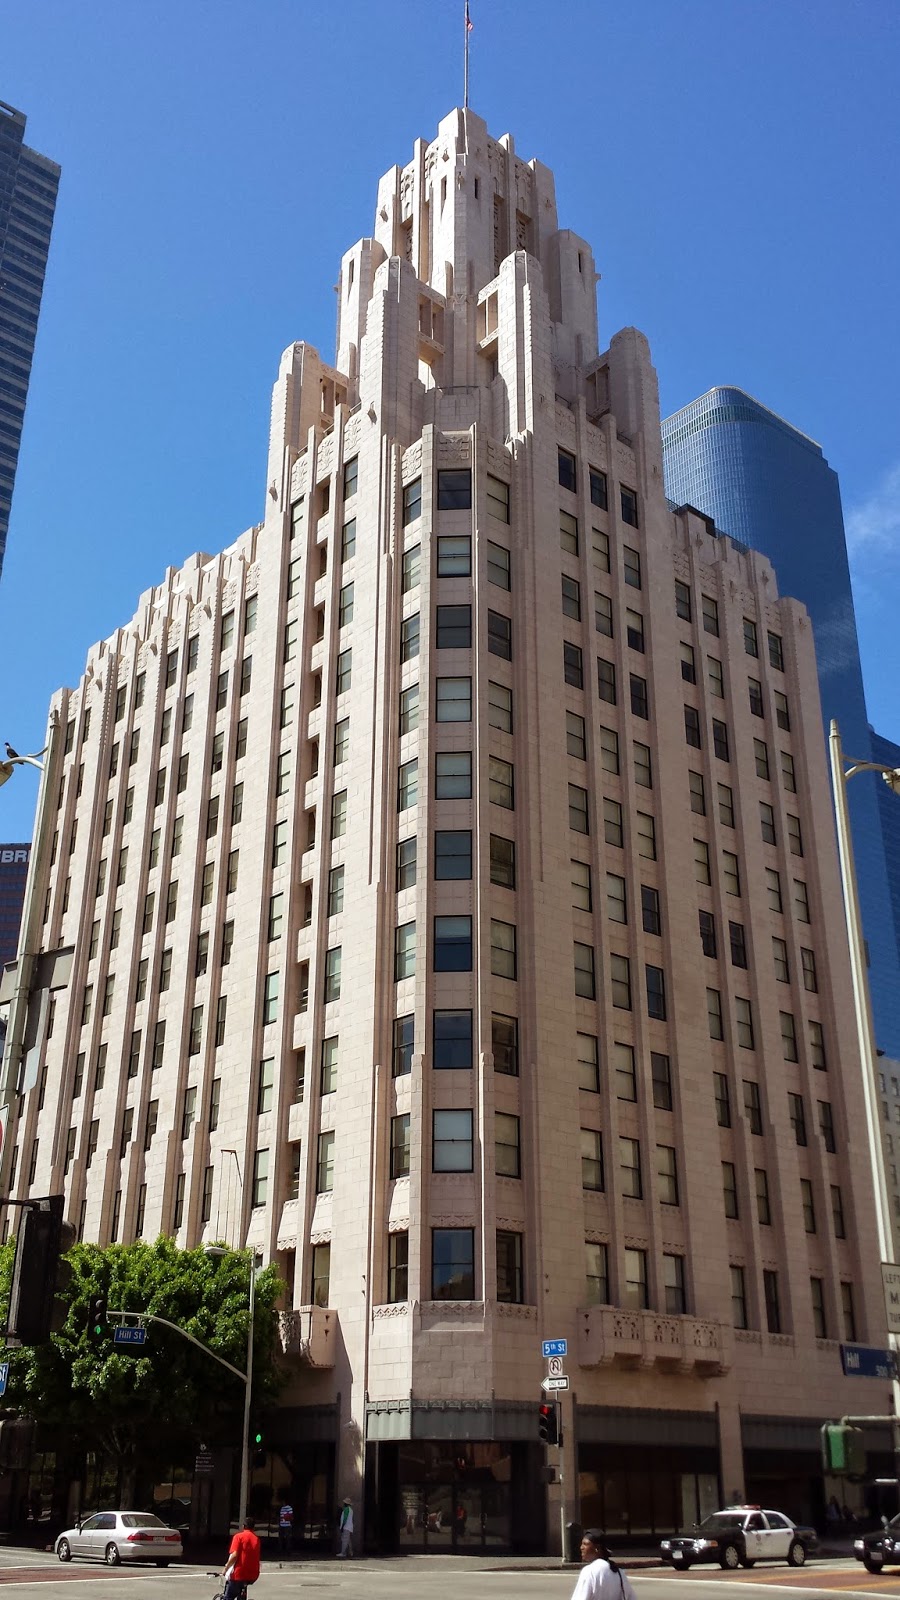 Historic Los Angeles Landmarks The Ultimate Guide Downtown Title